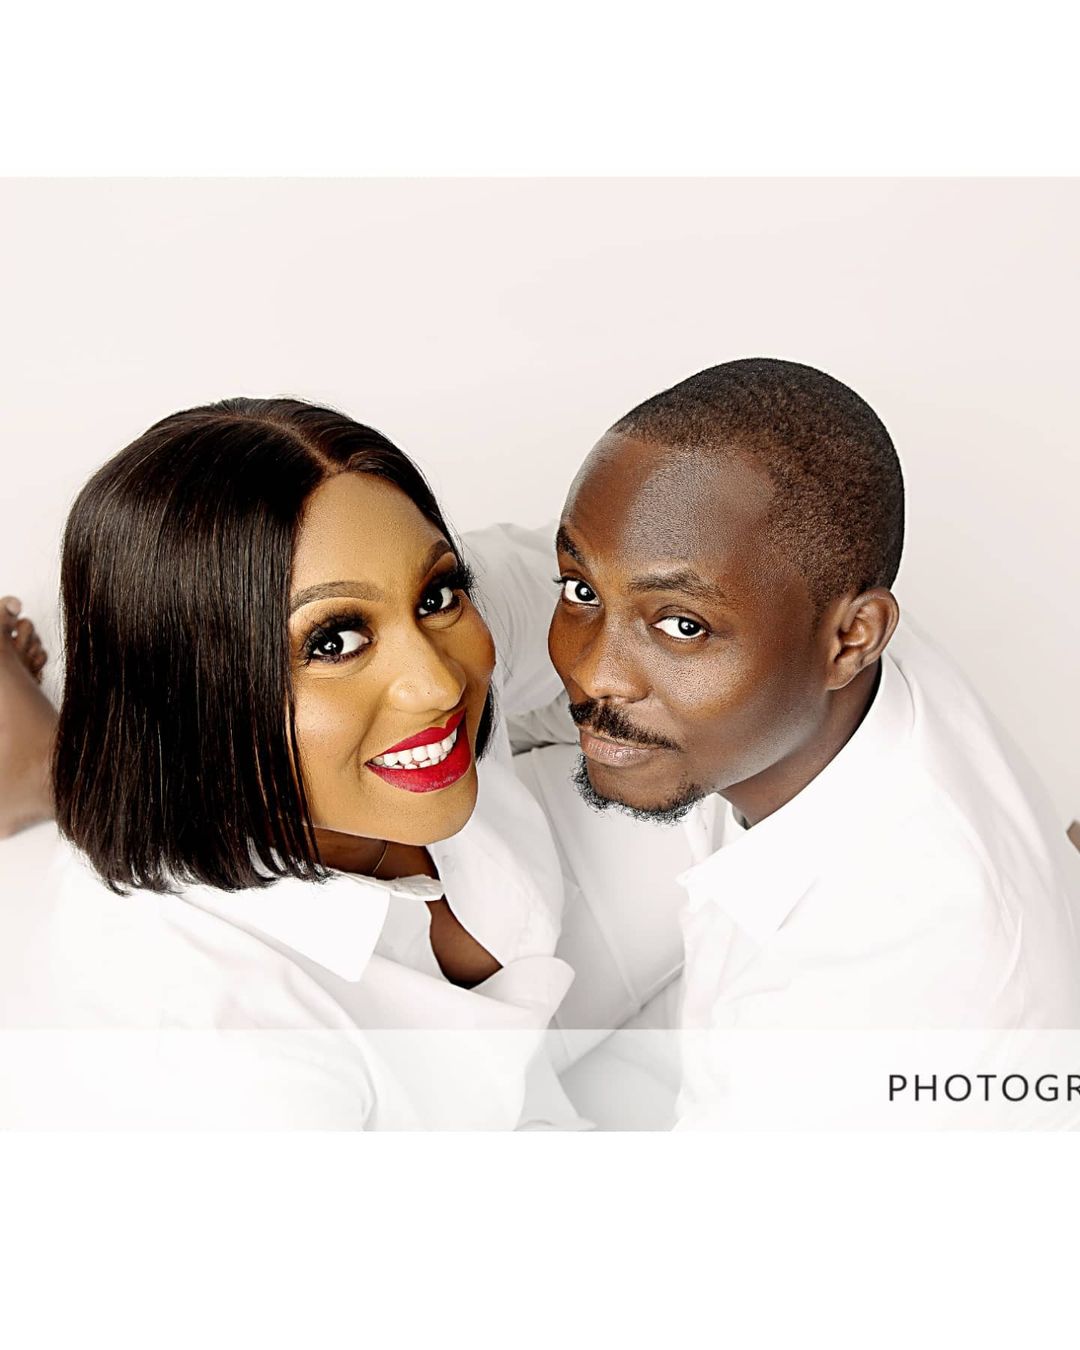 Thelma and Olayiwola's Pre-wedding Shoot Is Pure Magic